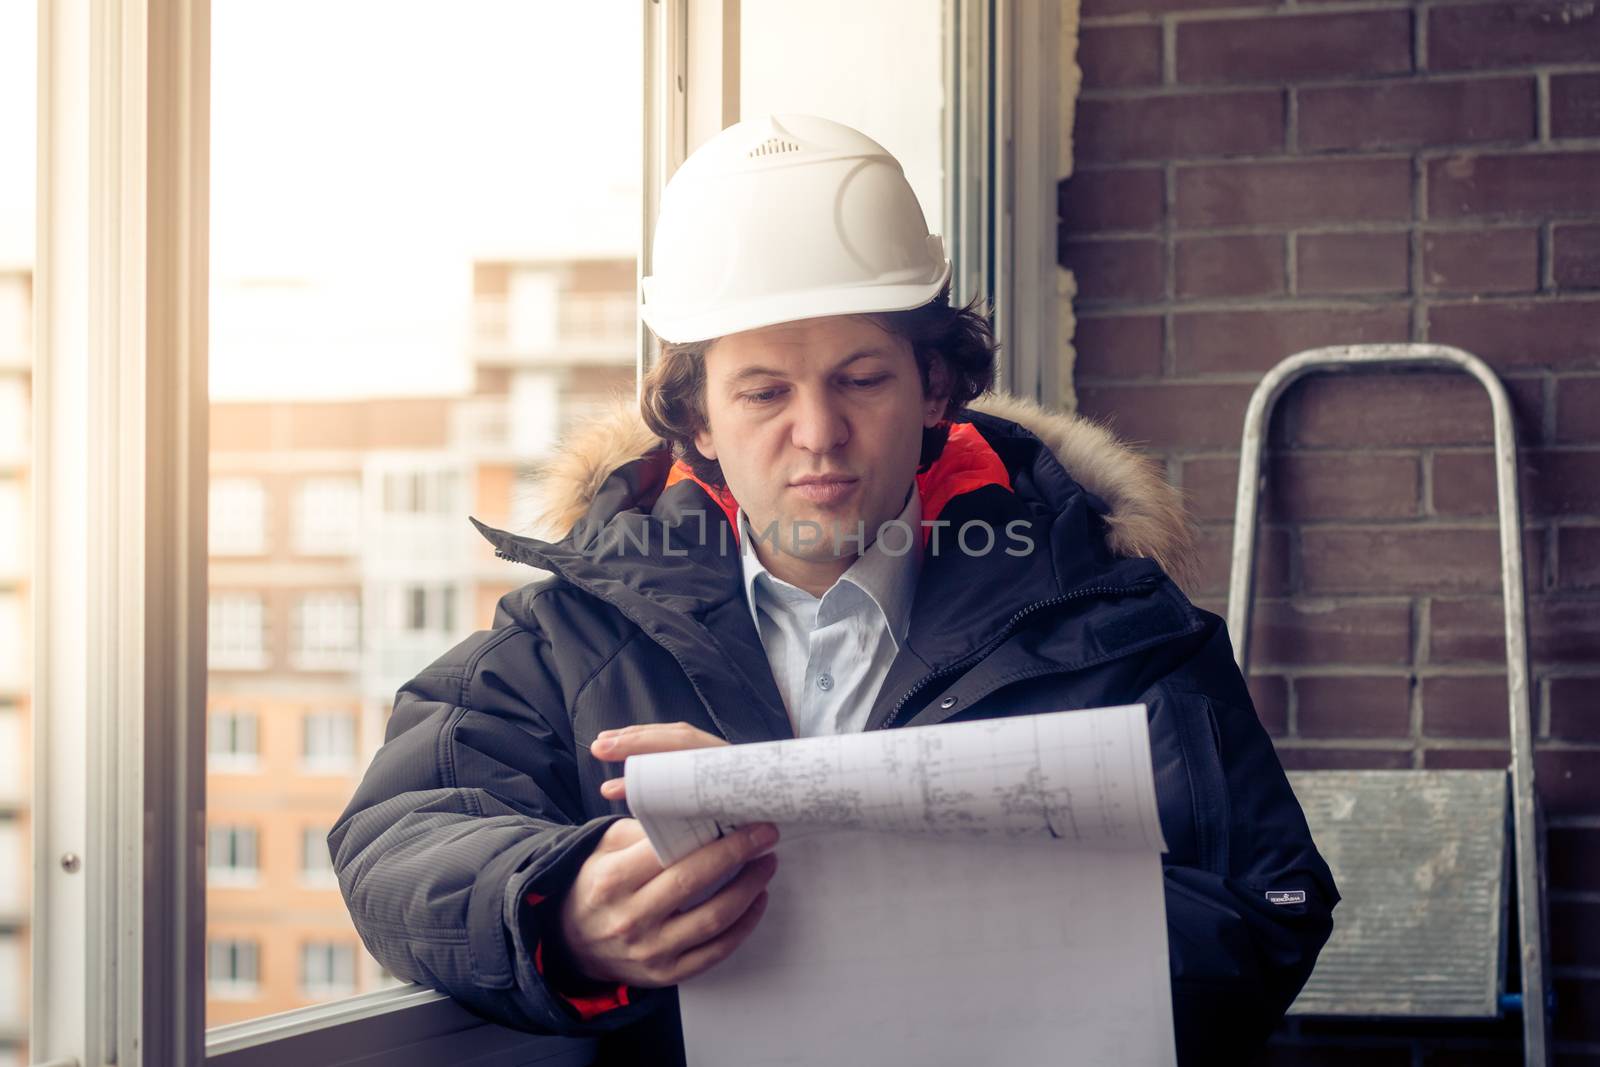 Engineer-builder working with documents on the construction site. Worker inspects drawings on the construction site against the background of brick wall. Soft focus, toned